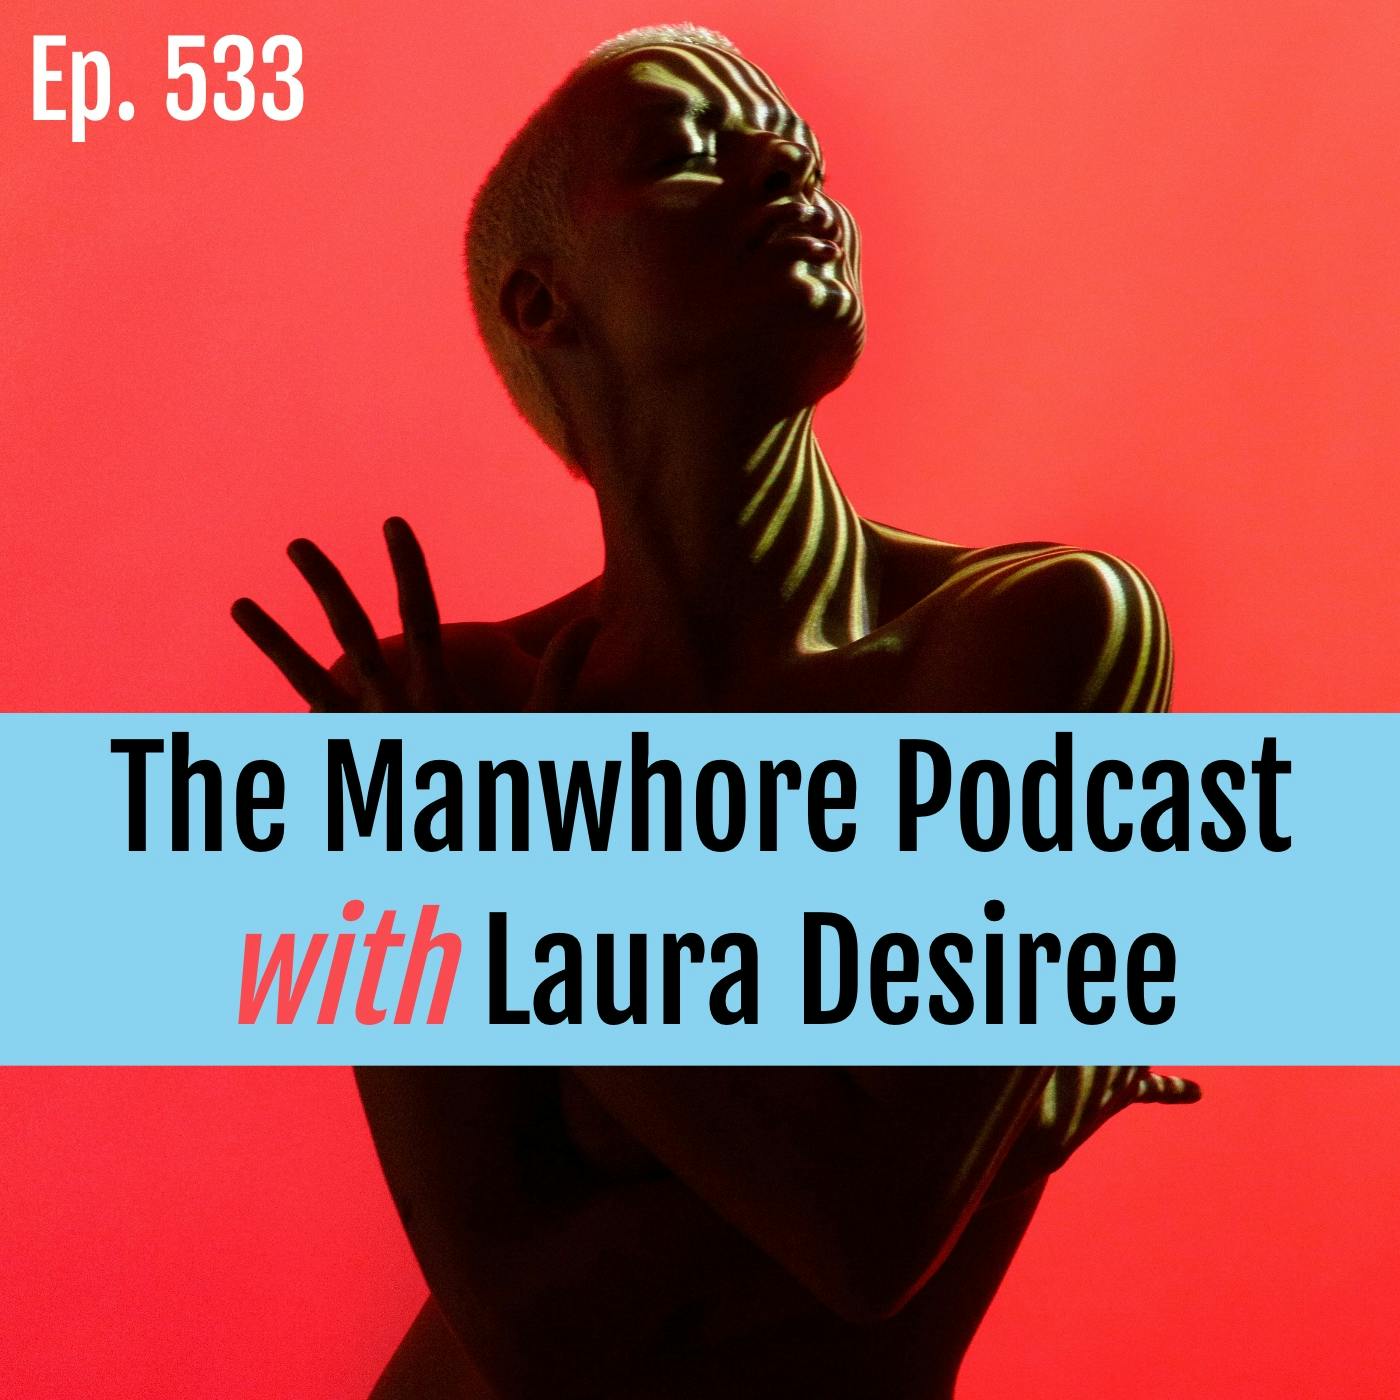 Ep. 533: ’Penetrative Art’ and Wounded Vore Fantasies with Naked News anchor Laura Desiree